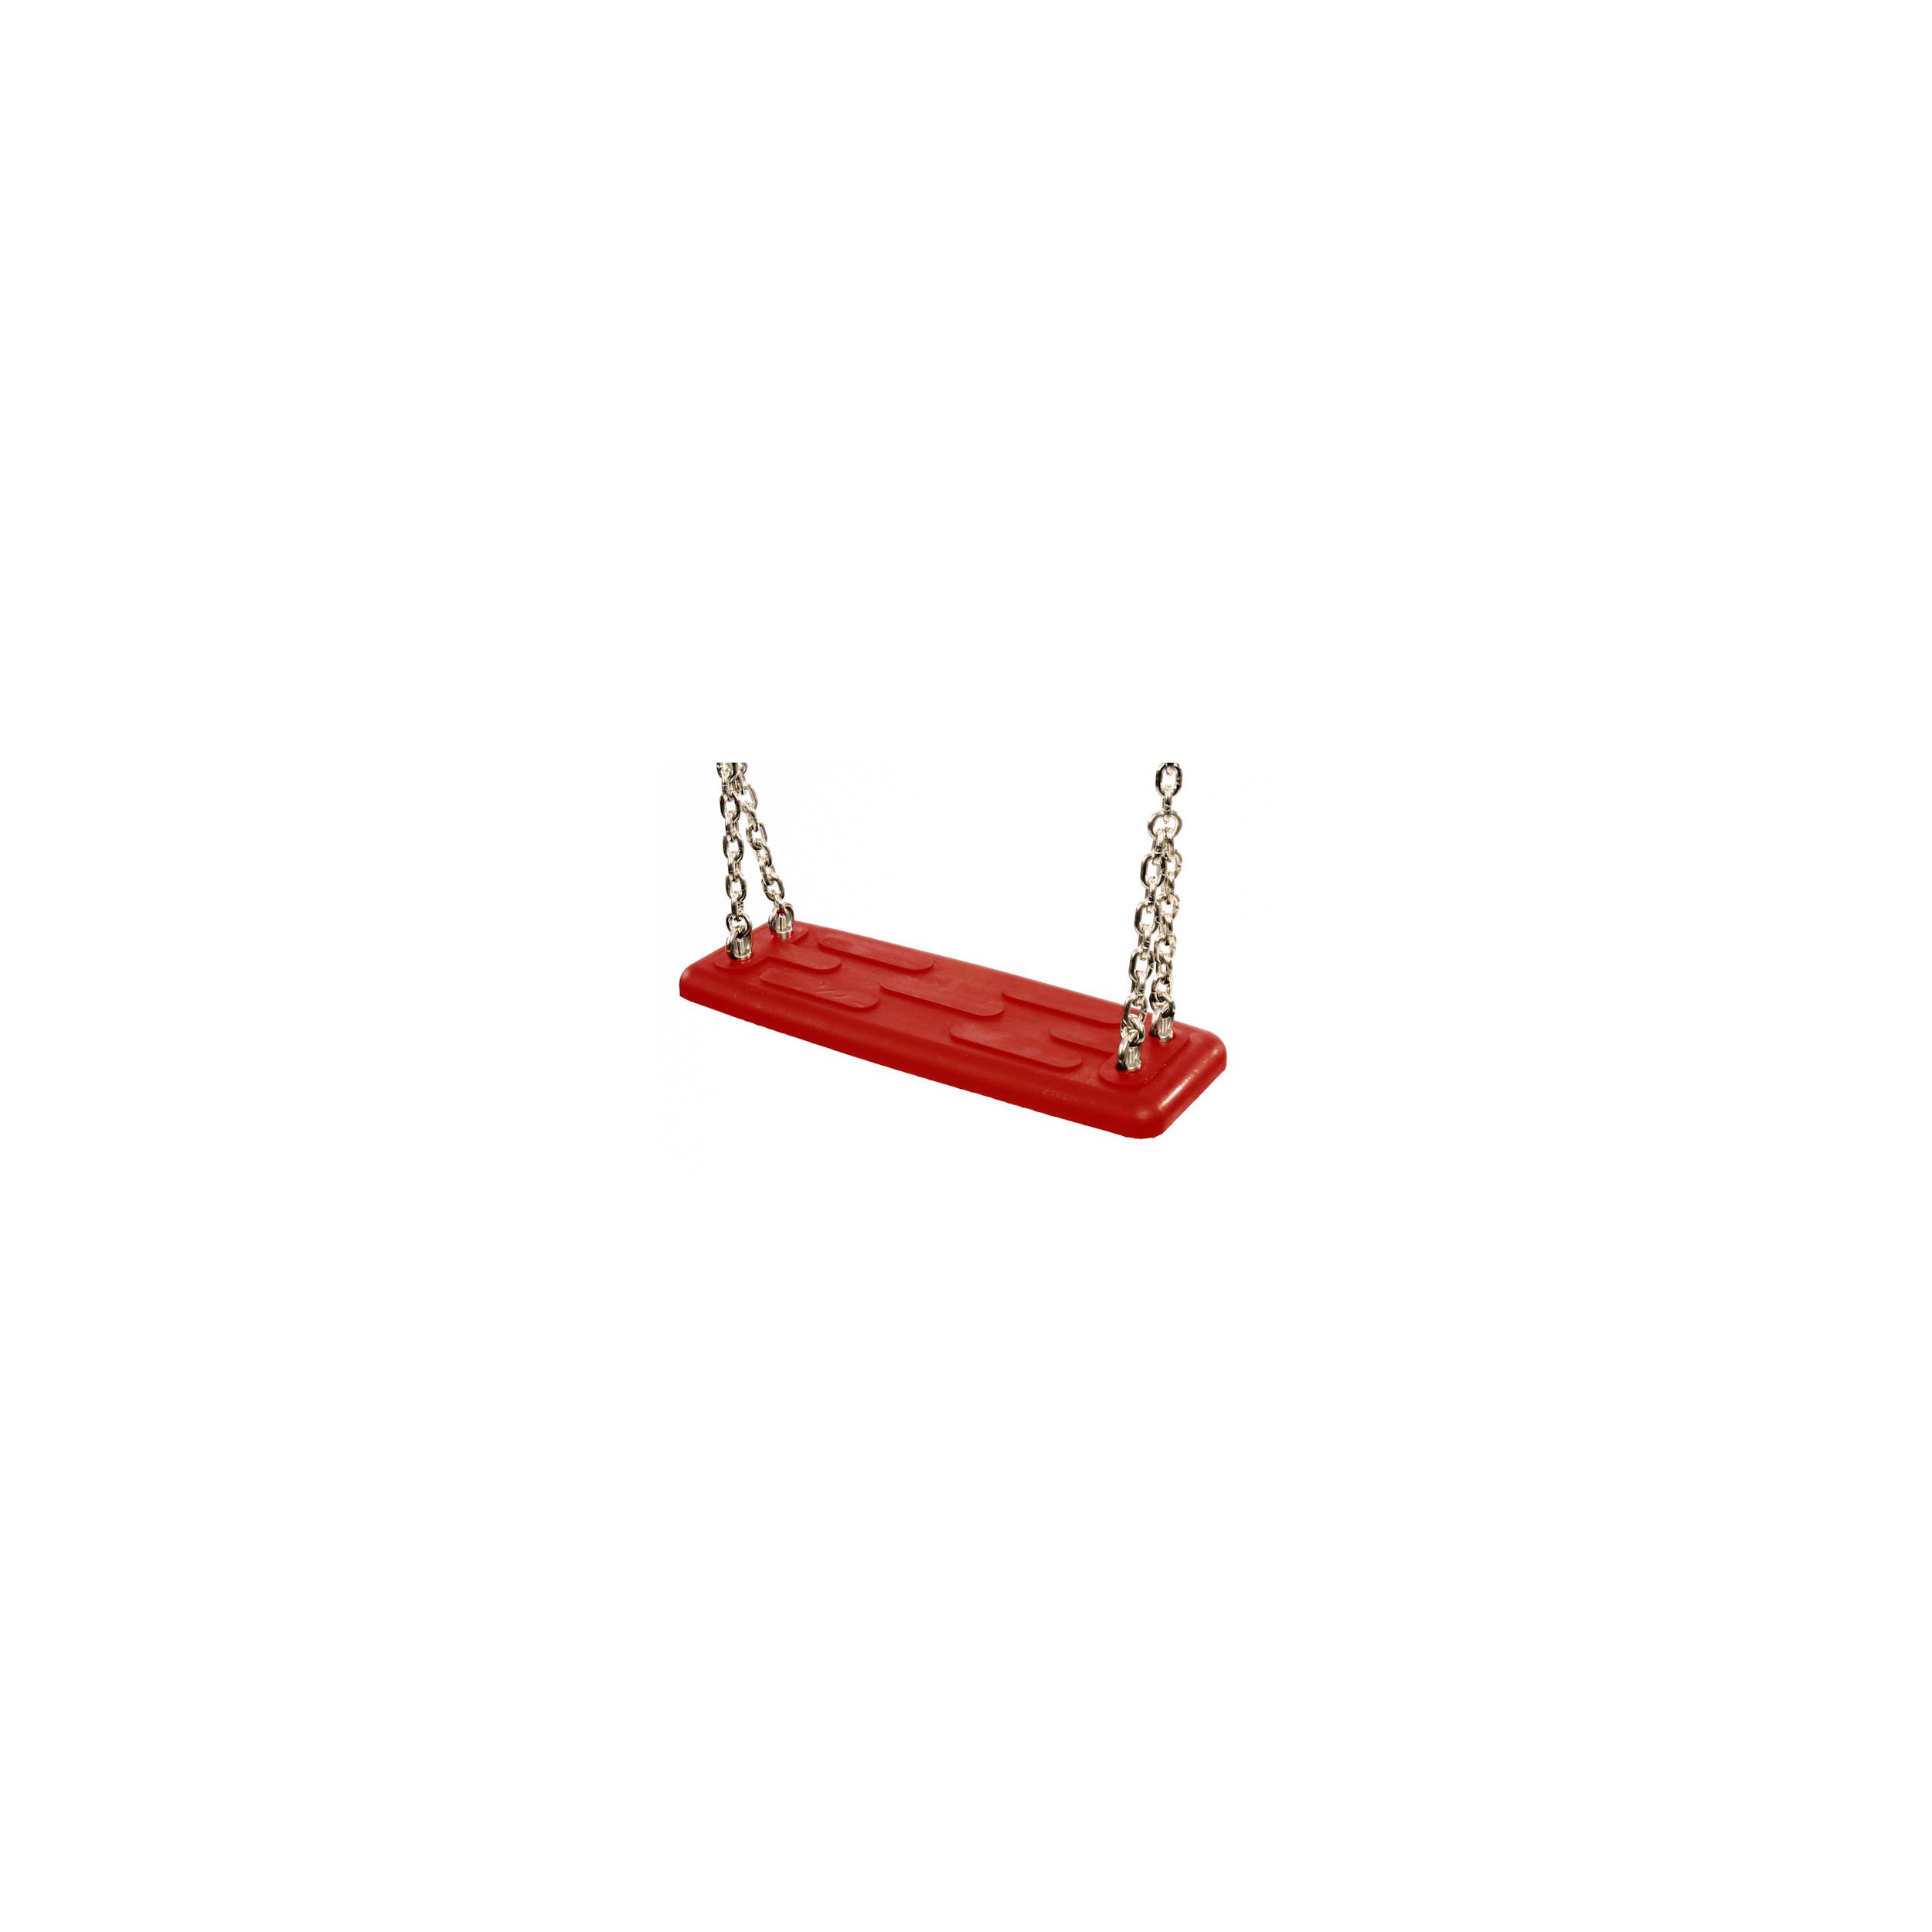 Commercial safety rubber swing seat type 1A red Stainless steel - AISI 304 250 cm